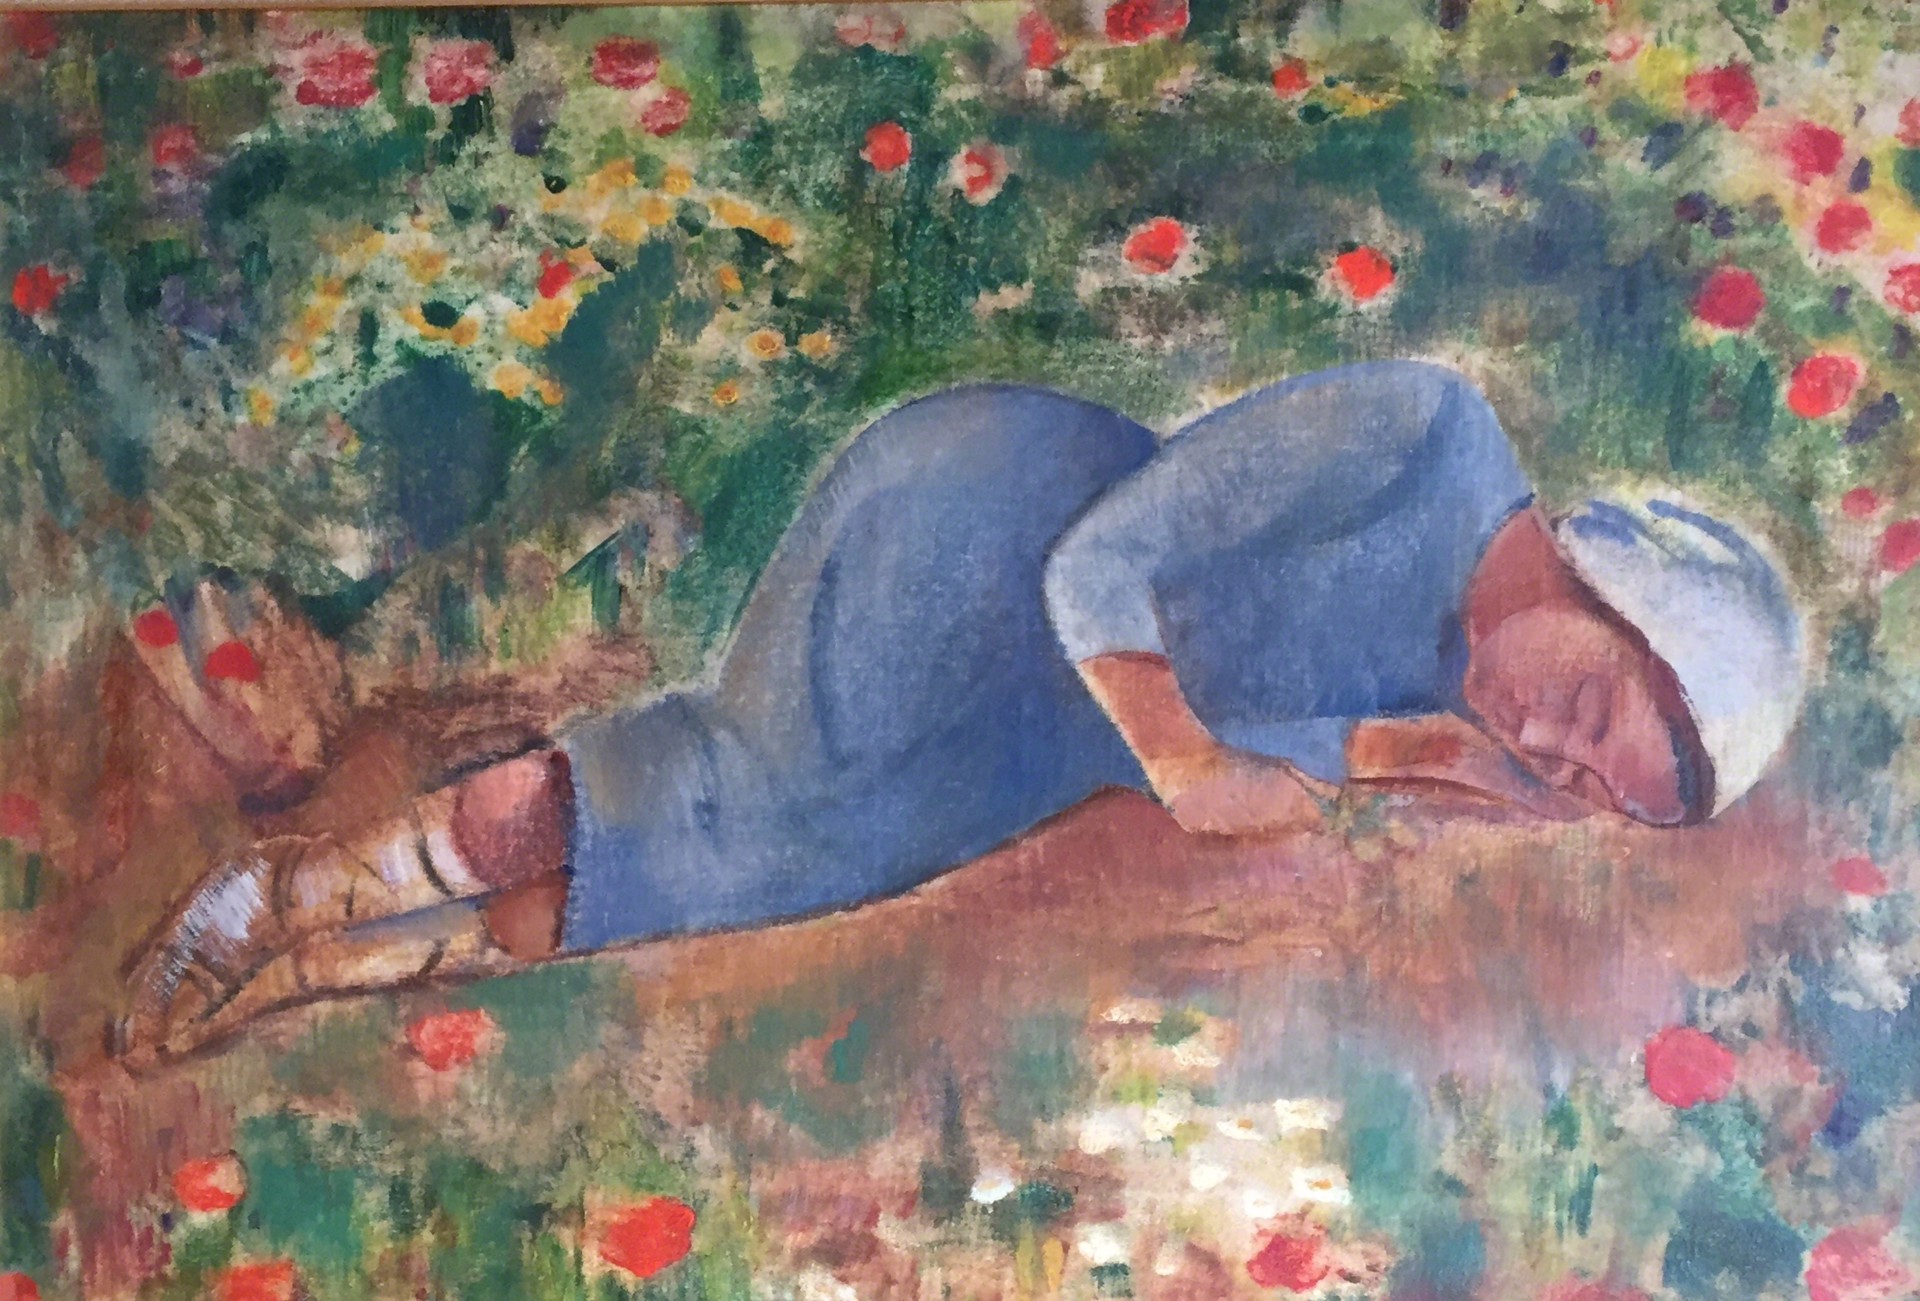 Asleep In the Poppies by Maurice Sterne